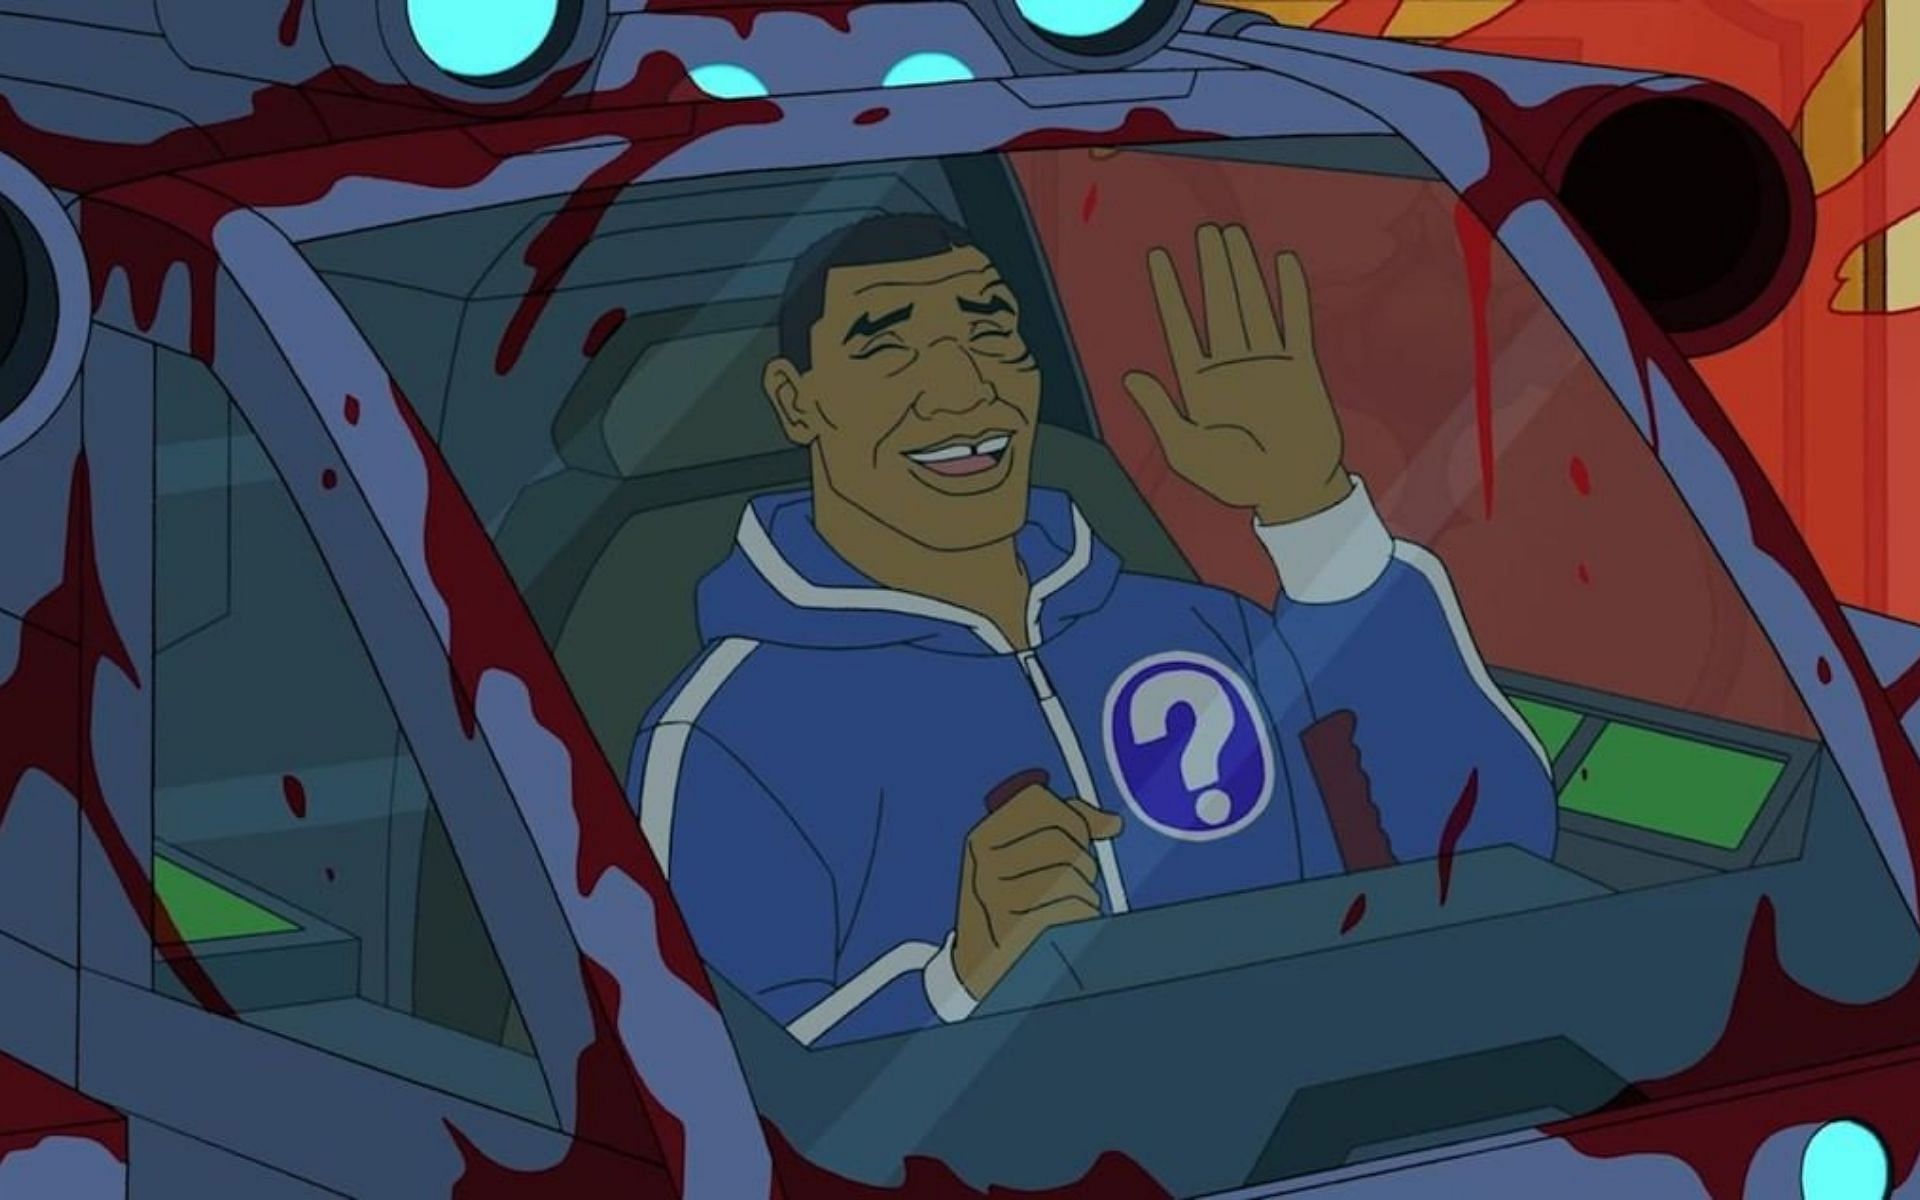 Mike Tyson Mysteries [Image Courtesy @miketysonmysteries on Instagram]